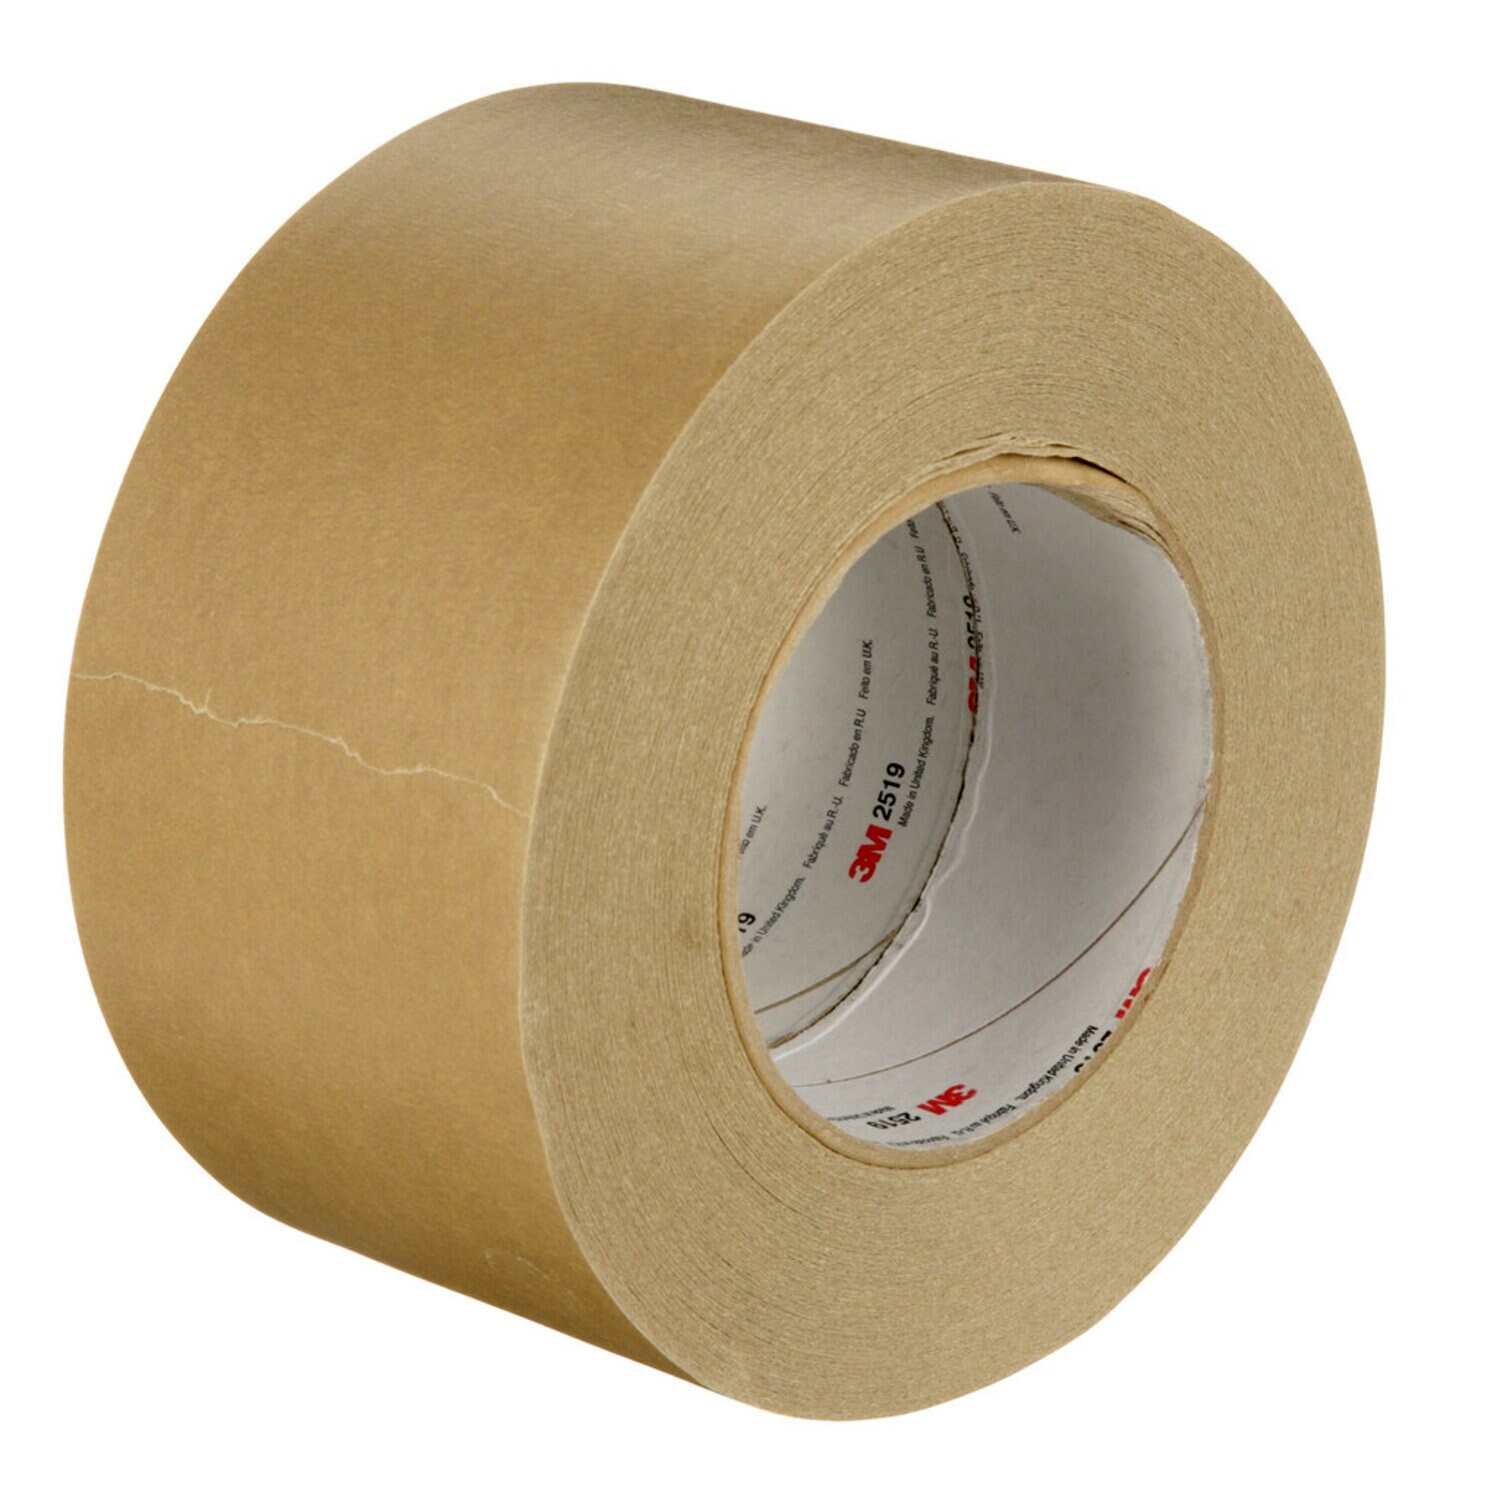 7100243536, 3M High Performance Flatback Tape 2519, Tan, 72 mm x 55 m, (3  Roll/Pack) 12 Roll/Case, Aircraft products, paper-tapes